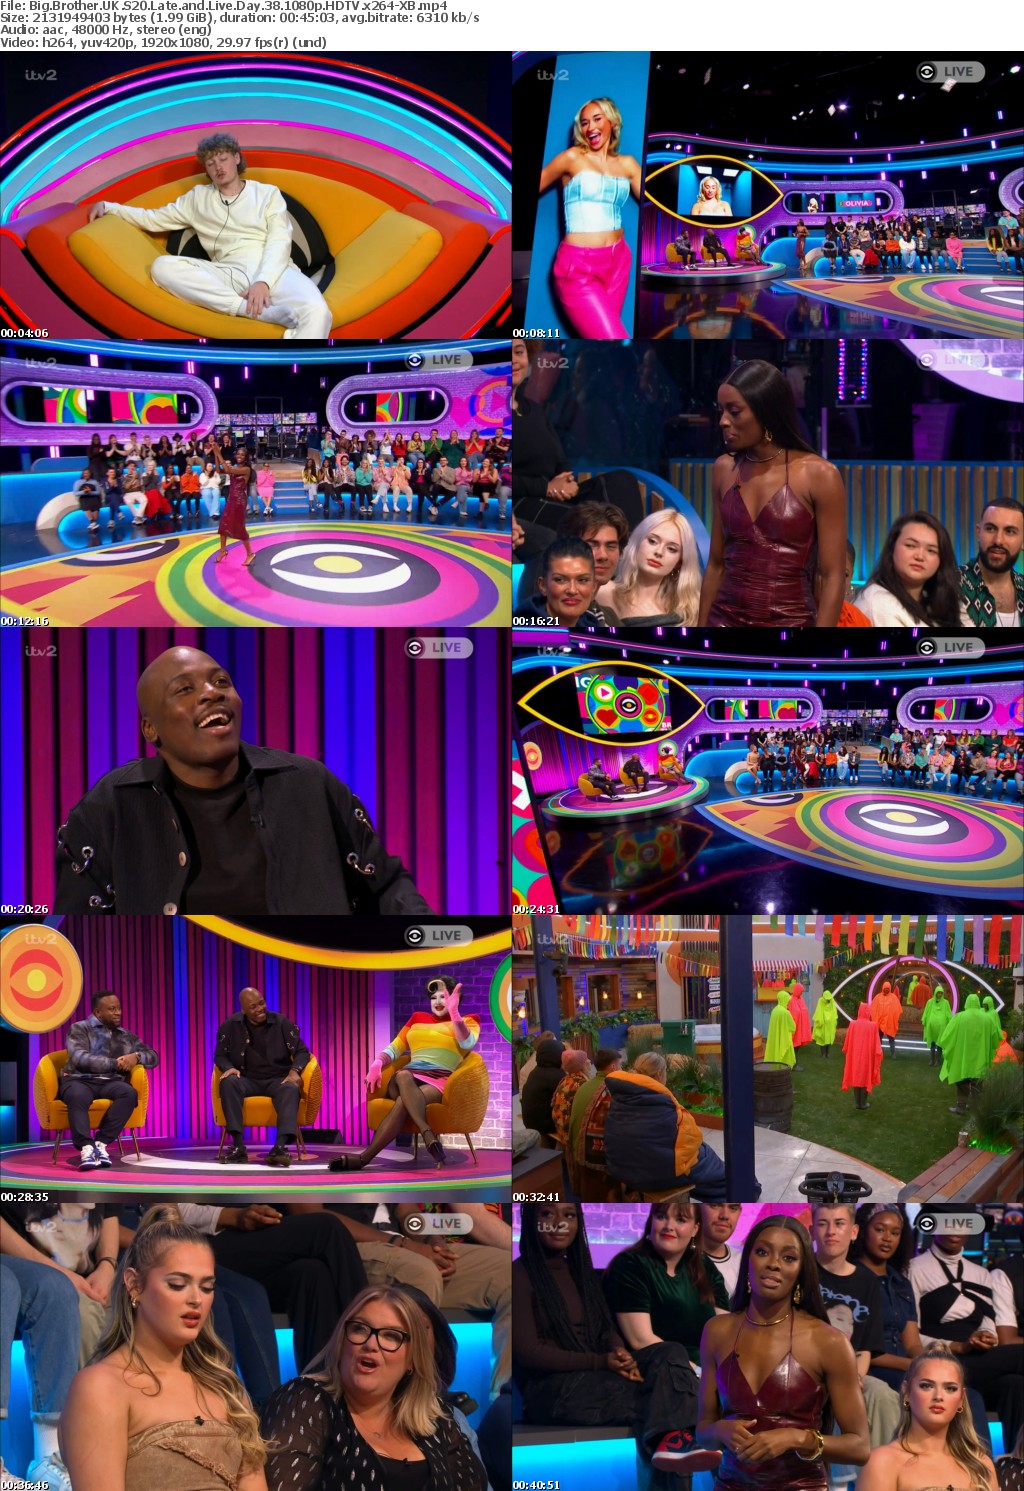 Big Brother UK S20 Late and Live Day 38 1080p HDTV x264-XB